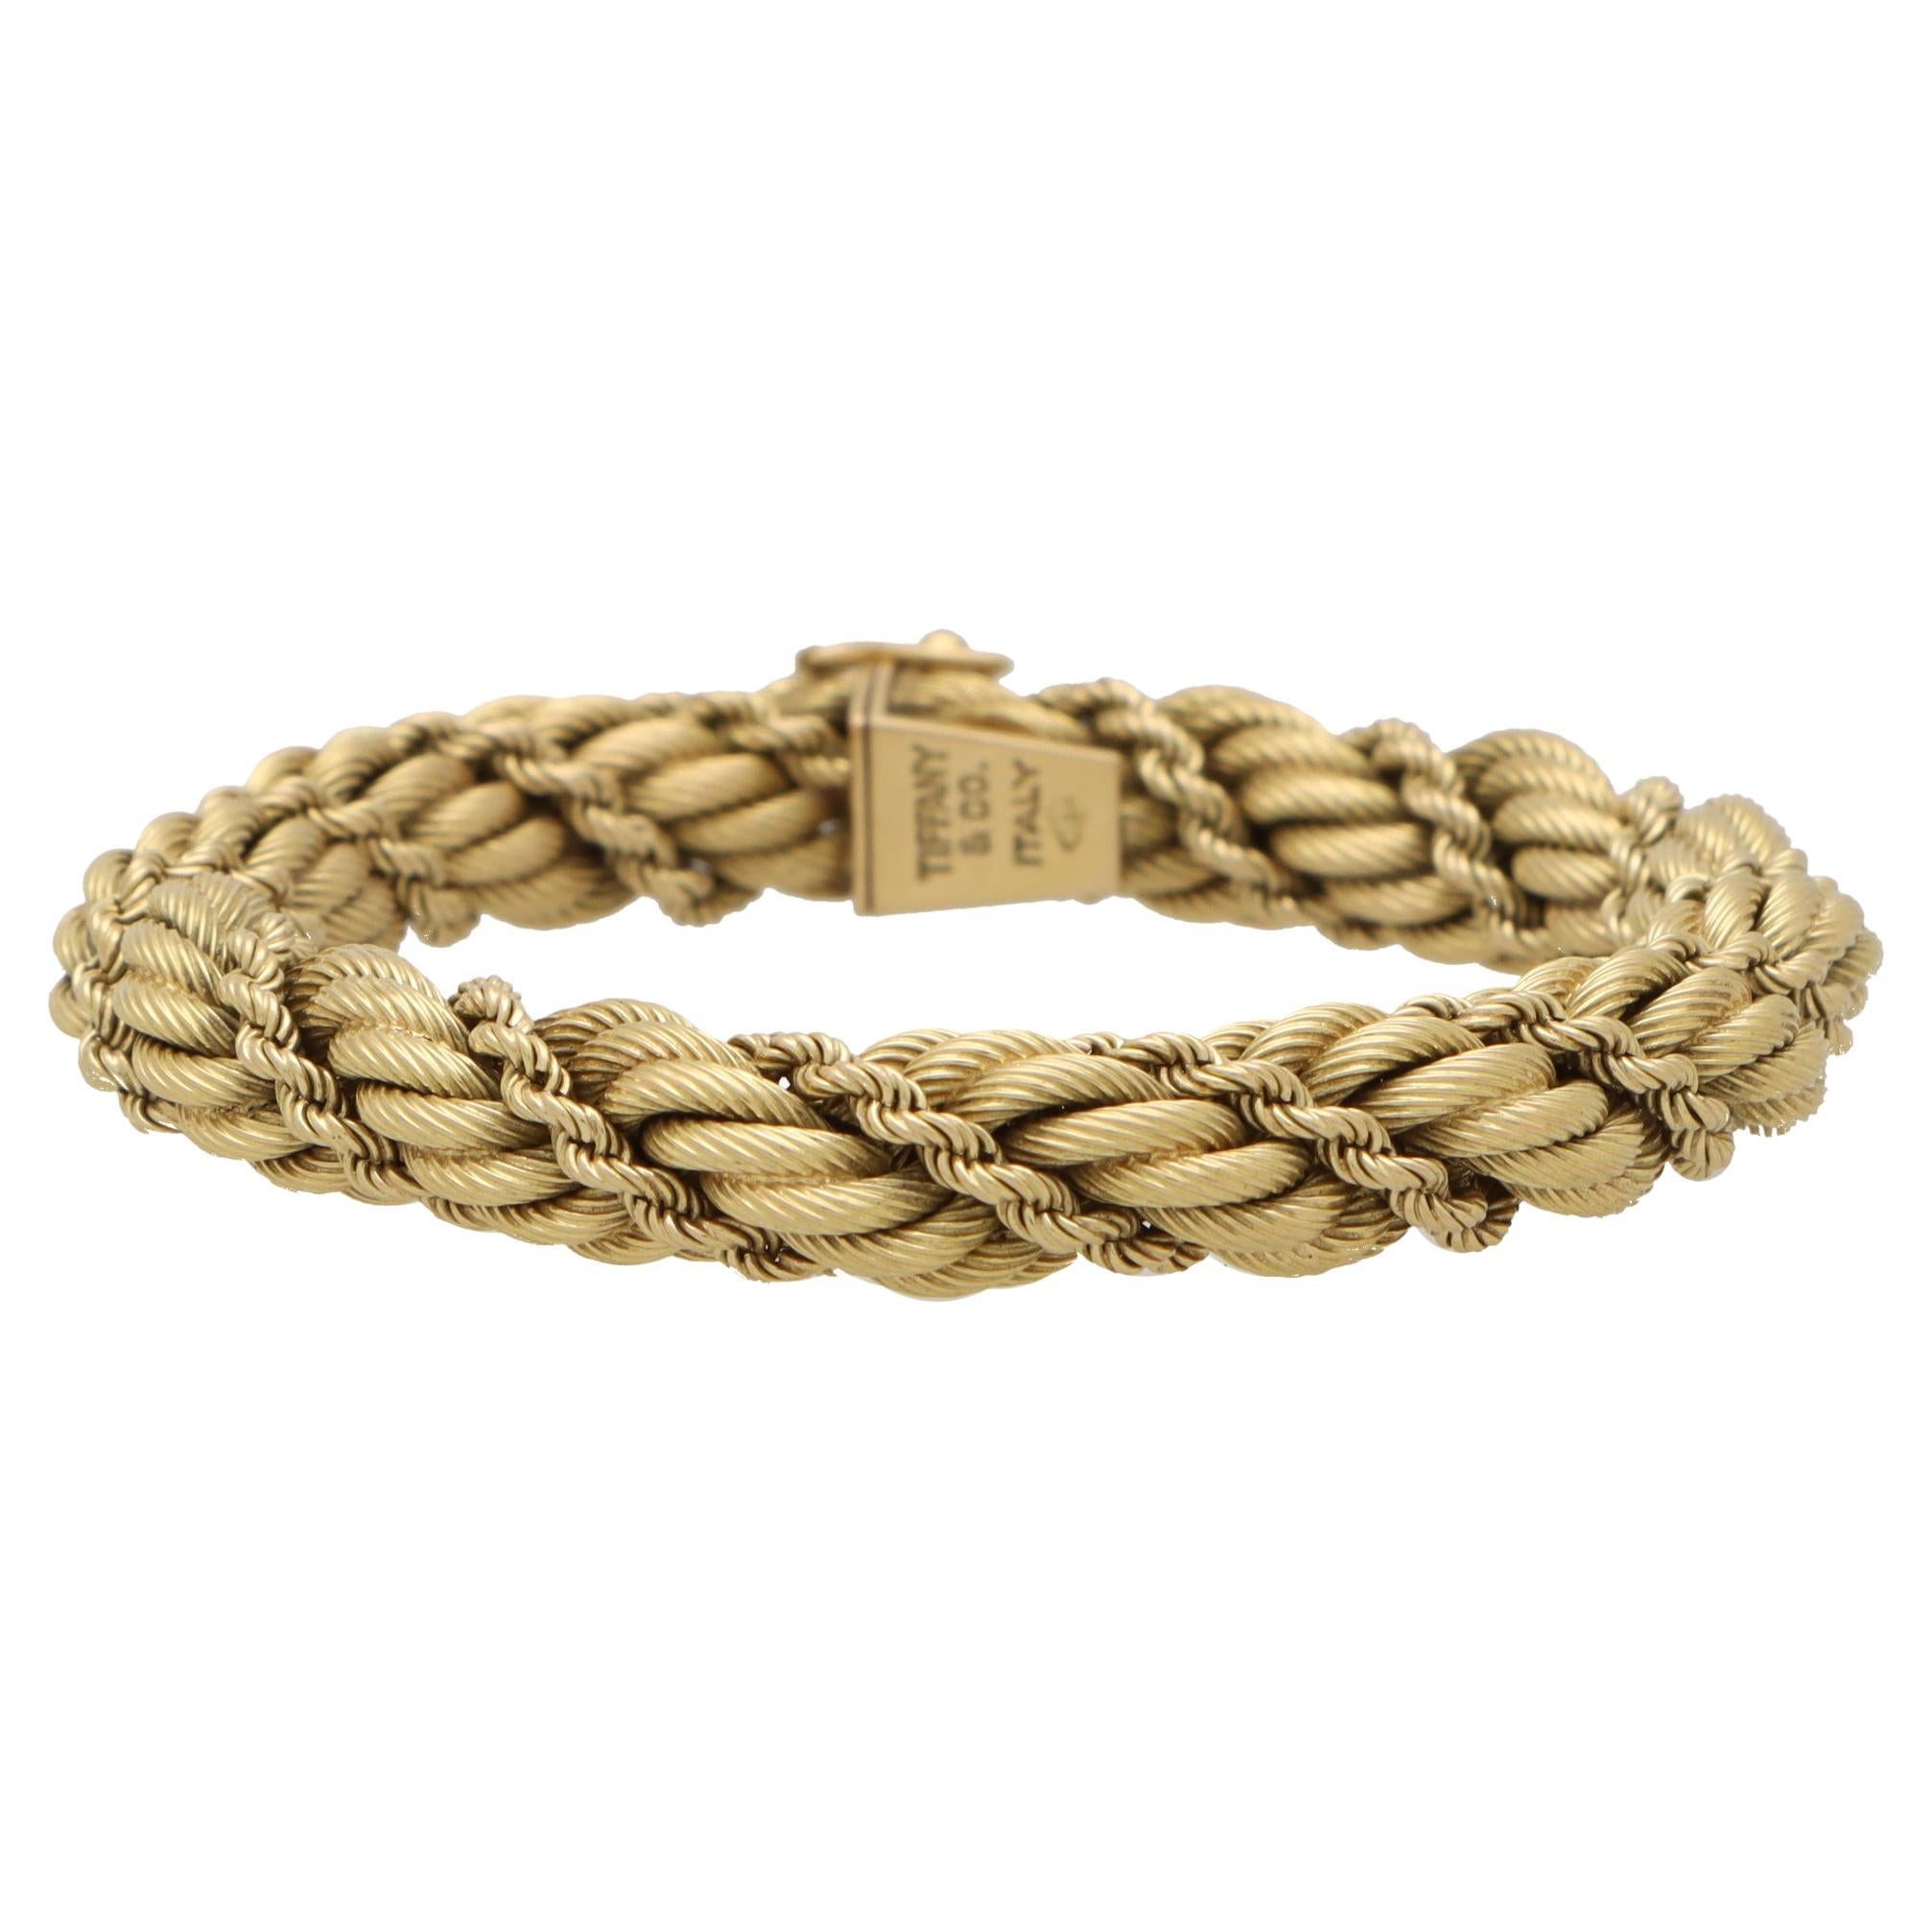 Vintage Tiffany & Co. Twisted Rope Bracelet Set in 18k Yellow Gold